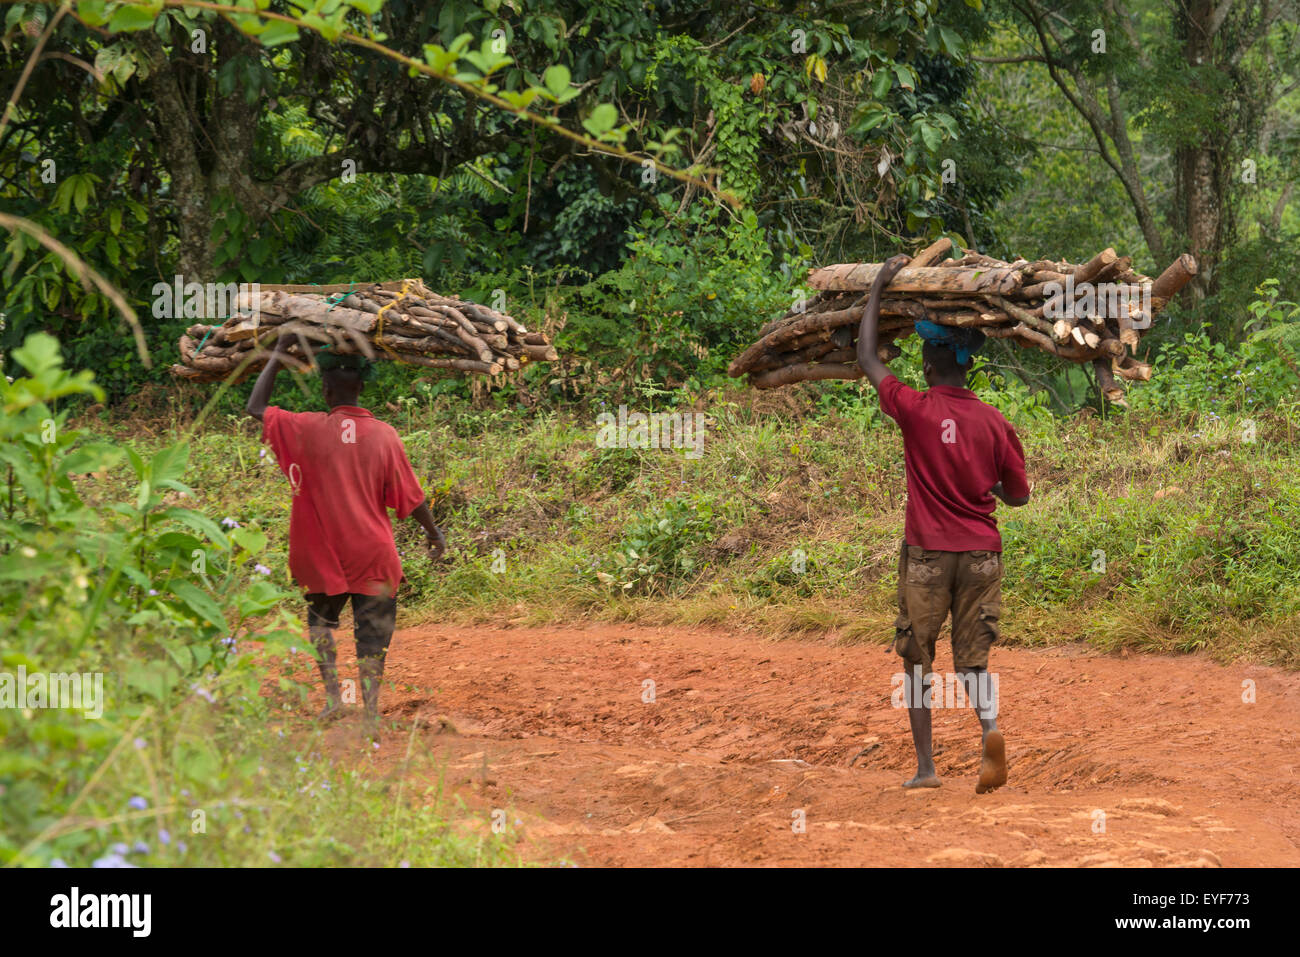 Young men walking down dirt road with large piles of wood on their heads, Zomba plateau; Malawi Stock Photo